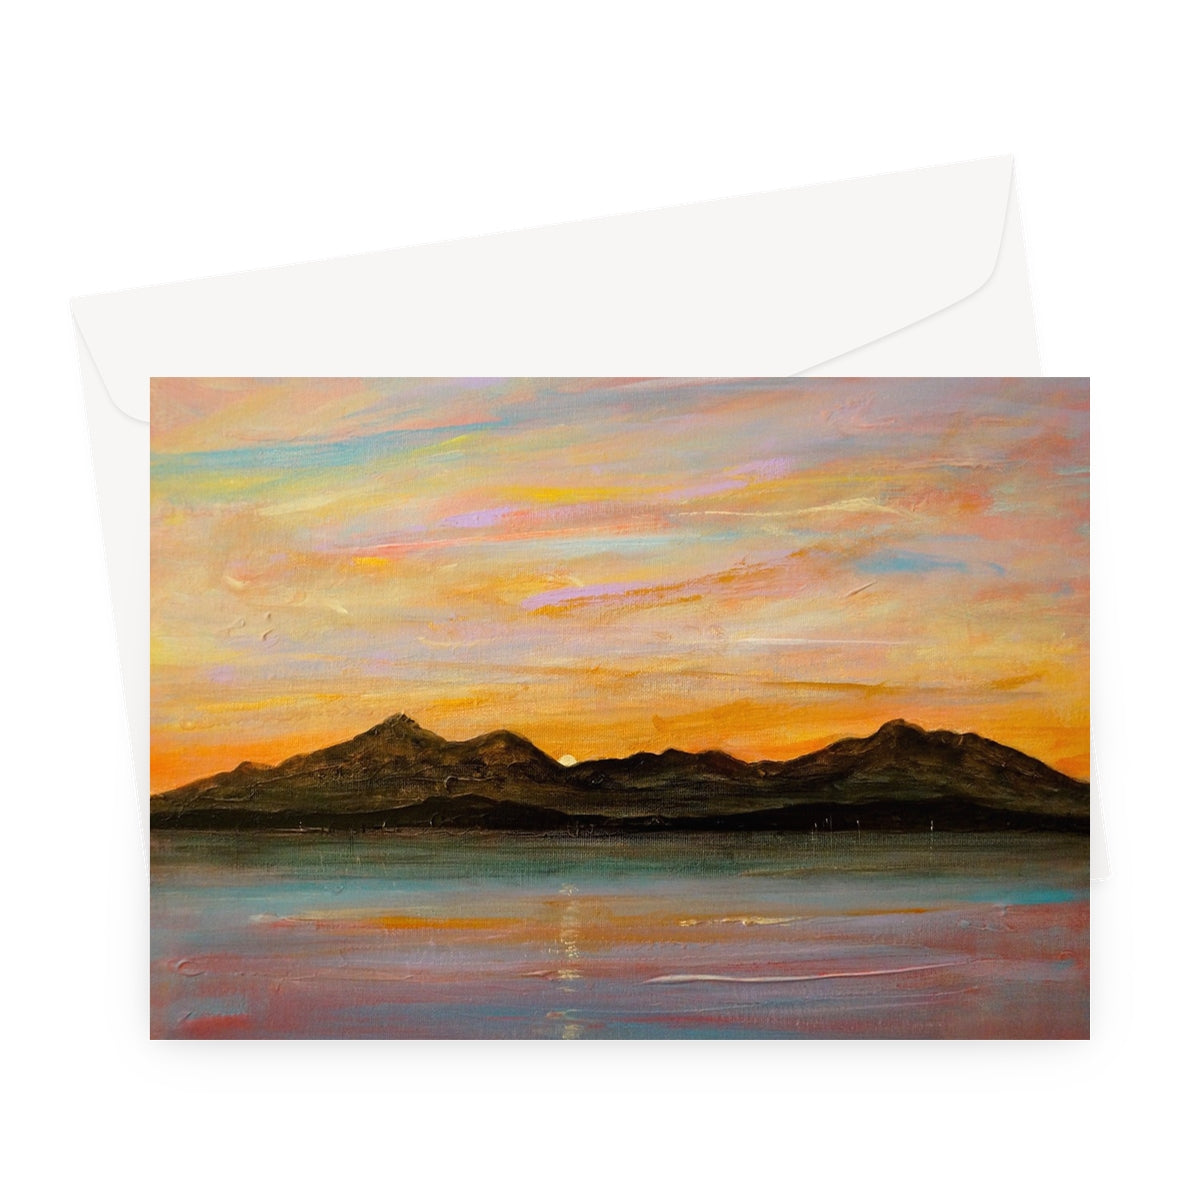 The Sleeping Warrior Arran Art Gifts Greeting Card-Greetings Cards-Arran Art Gallery-A5 Landscape-1 Card-Paintings, Prints, Homeware, Art Gifts From Scotland By Scottish Artist Kevin Hunter